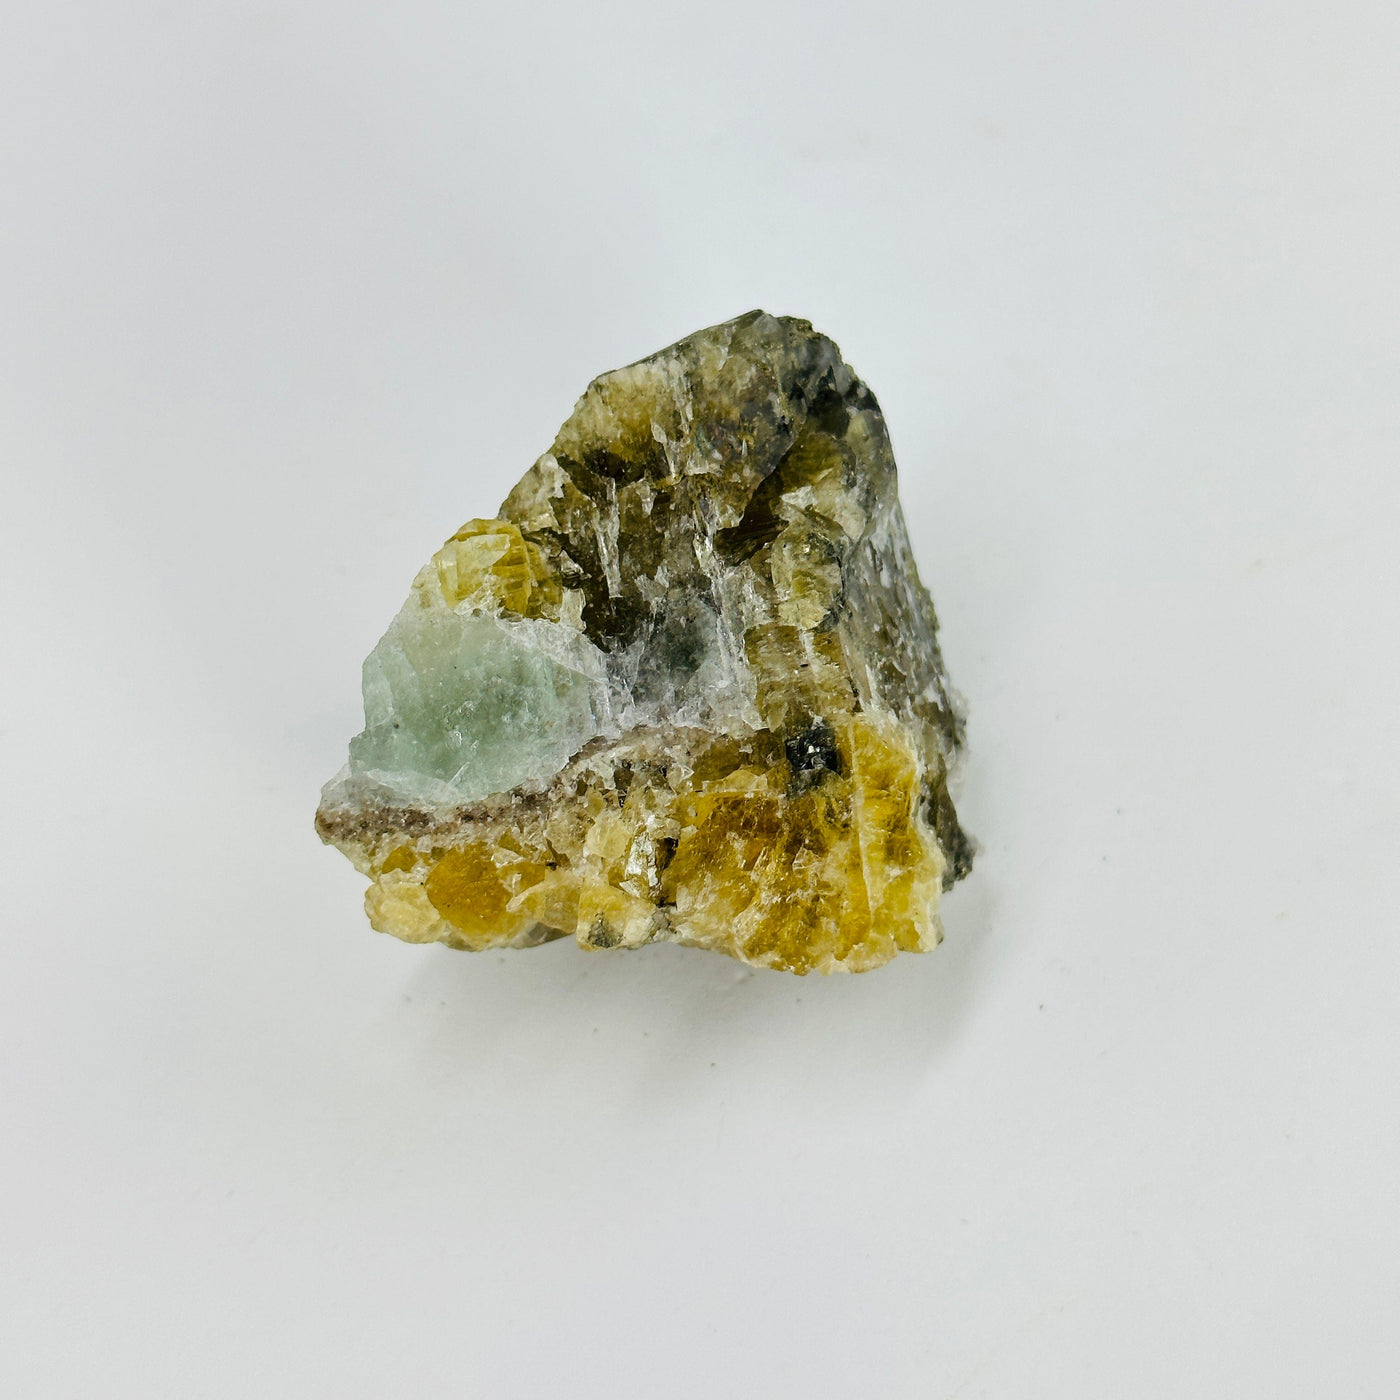 epidote with pyrite growth on white background